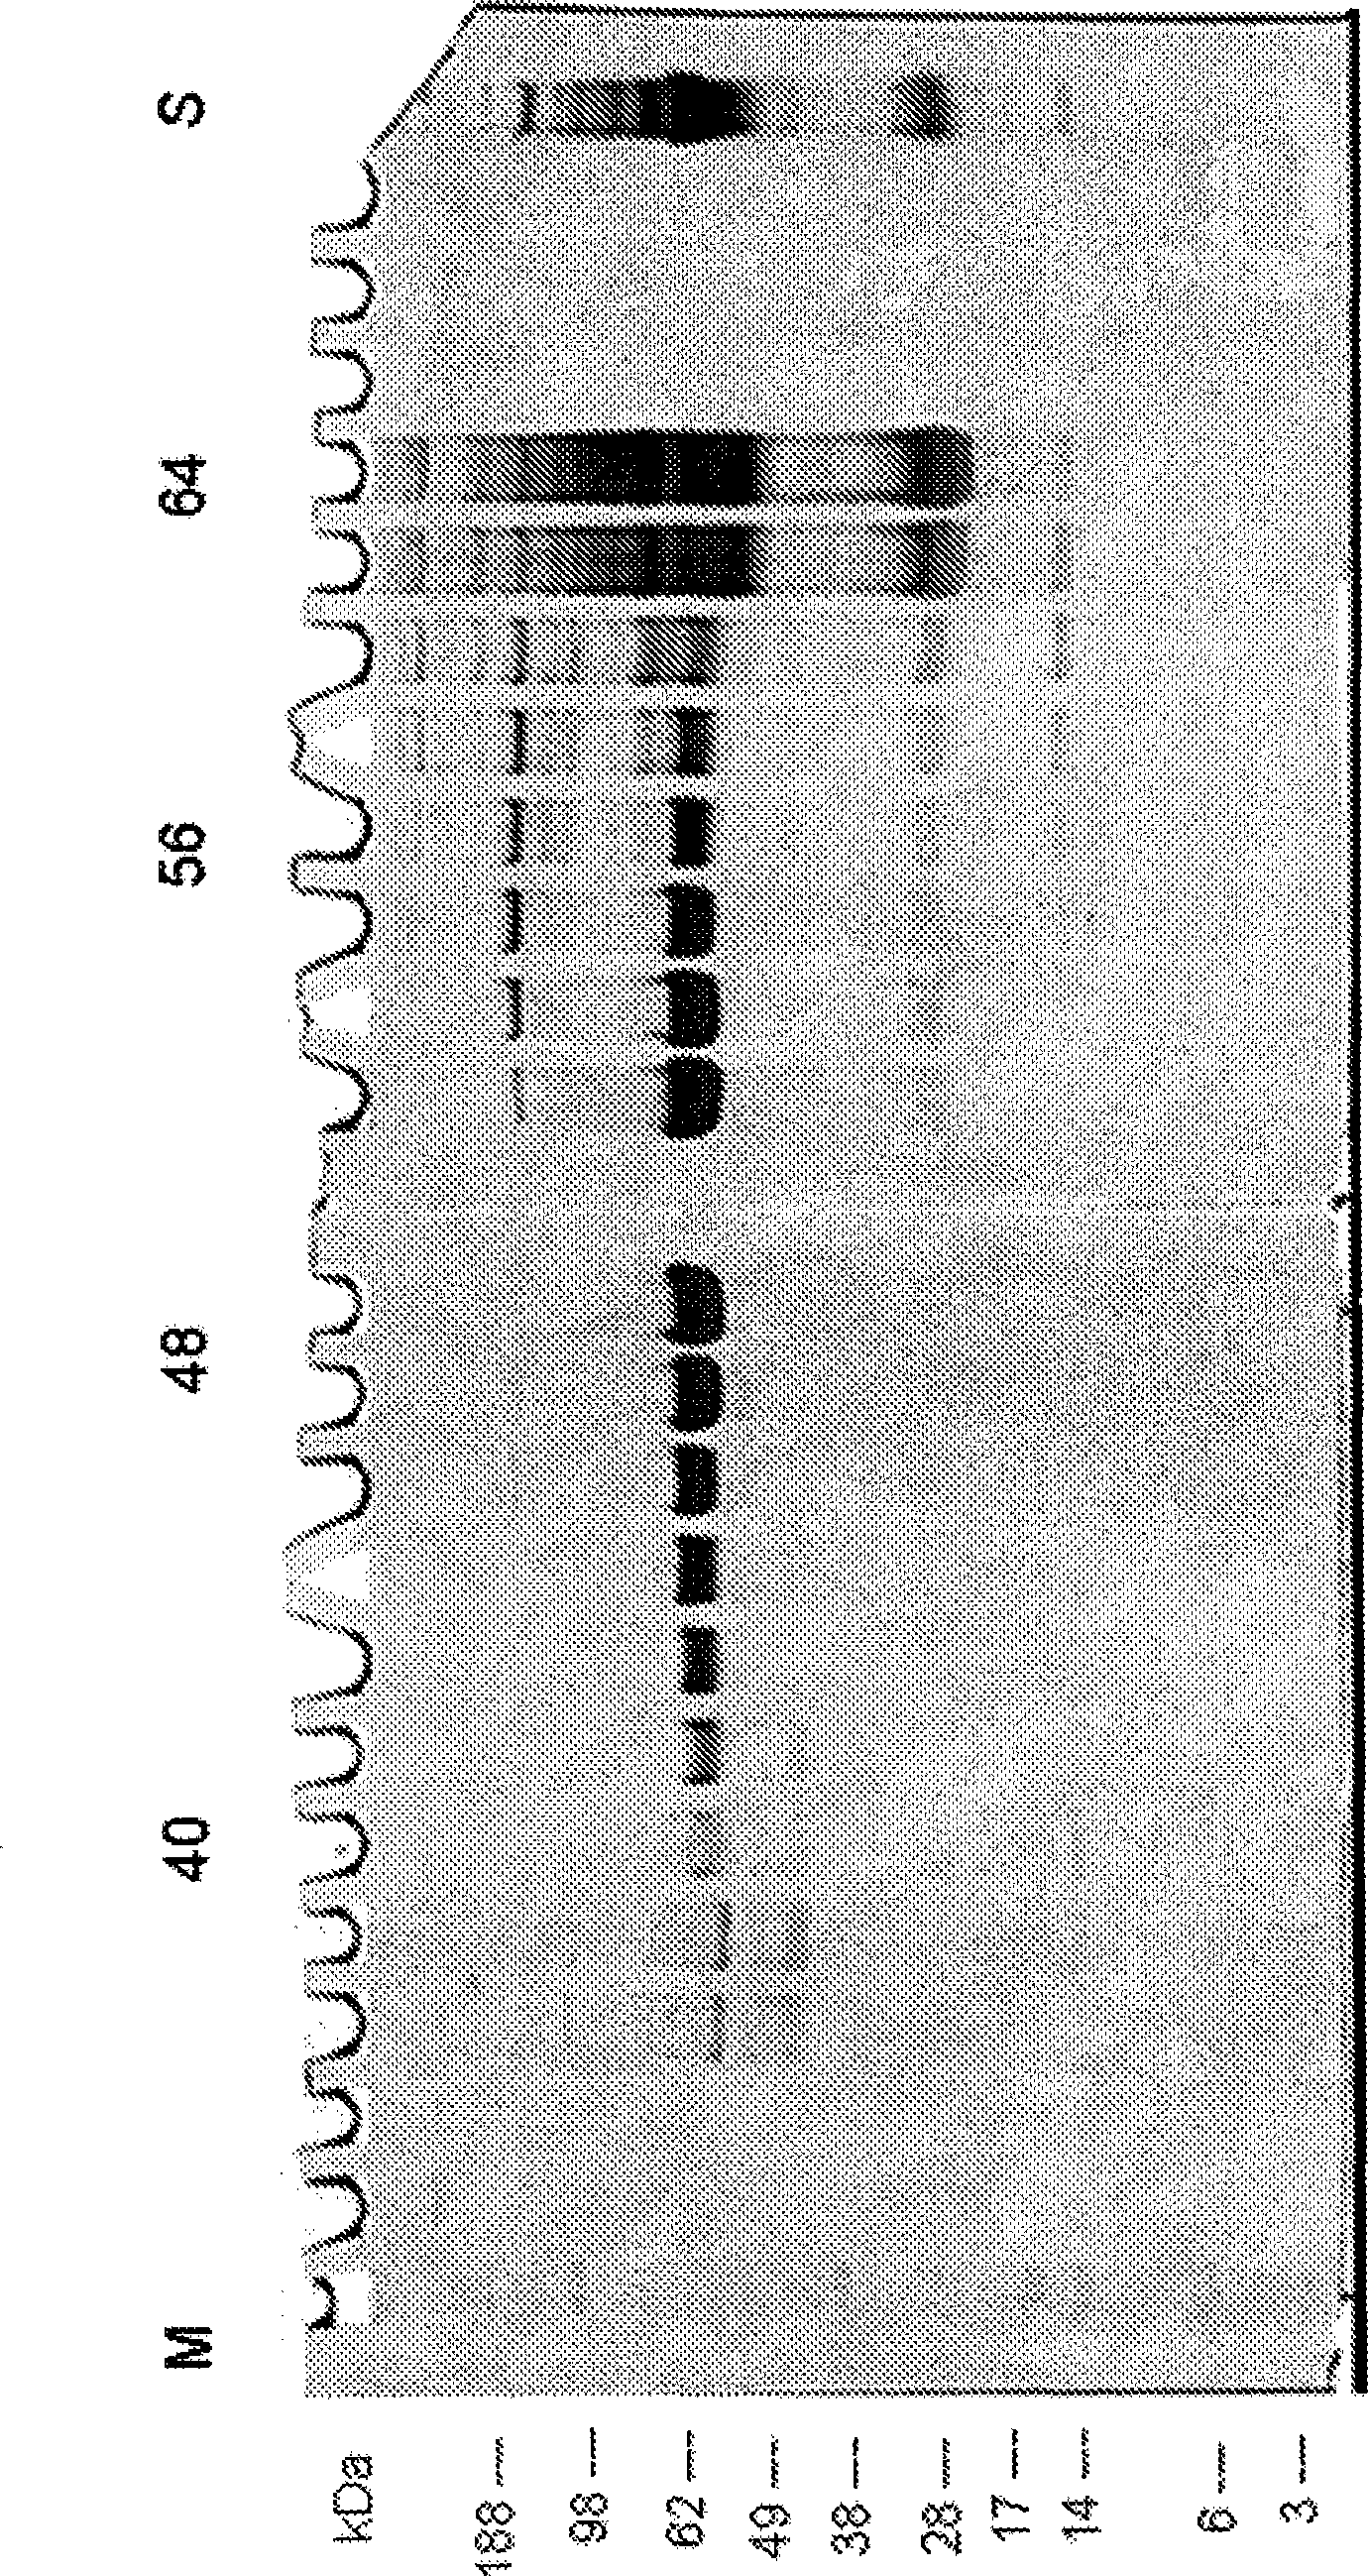 Method and device for separation and depletion of certain proteins and particles using electrophoresis